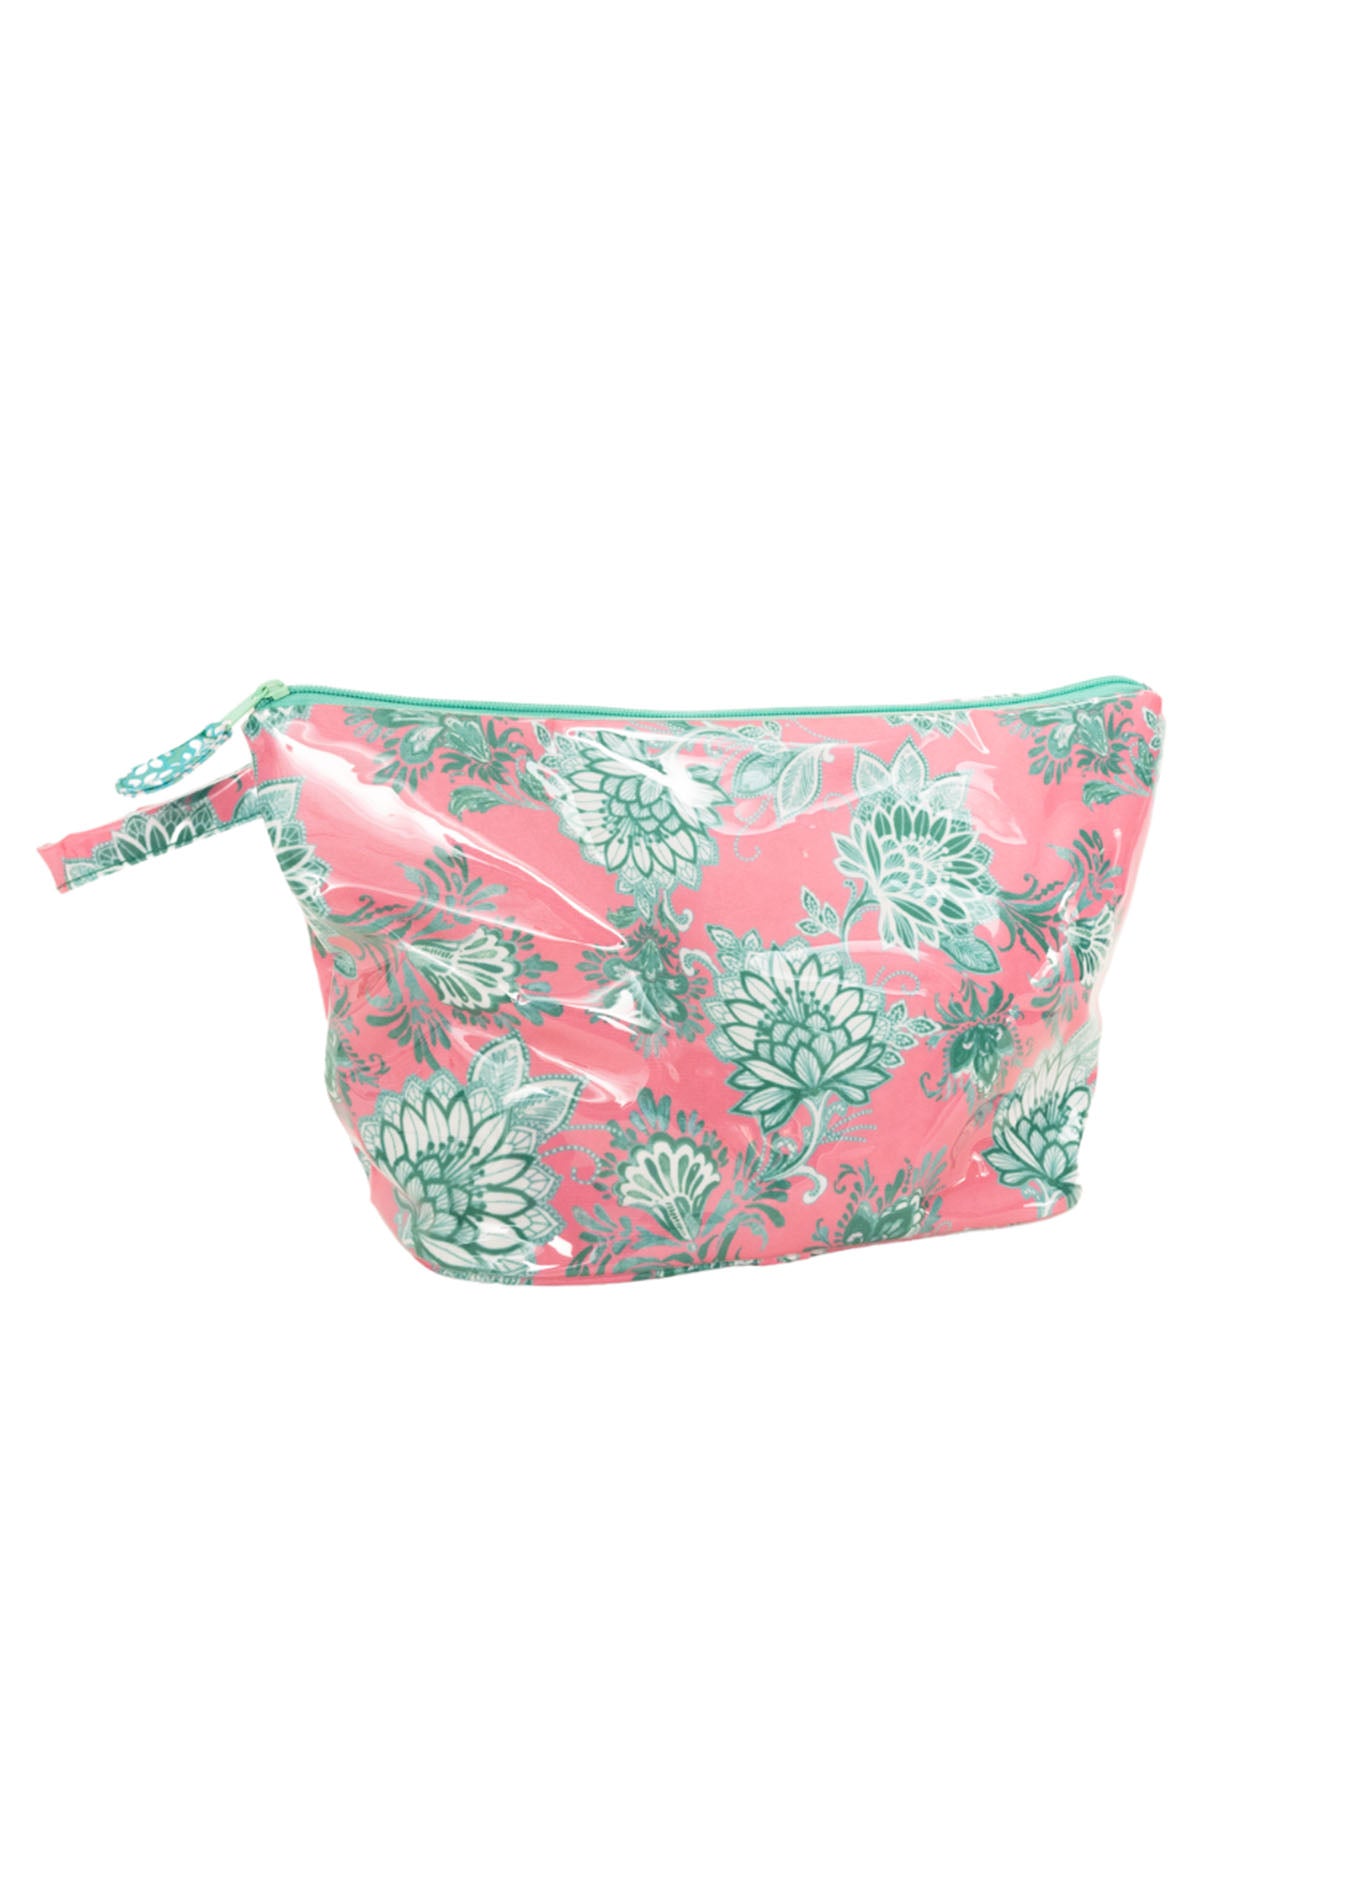 Cote d'Azur Large Accessory Bag on white background